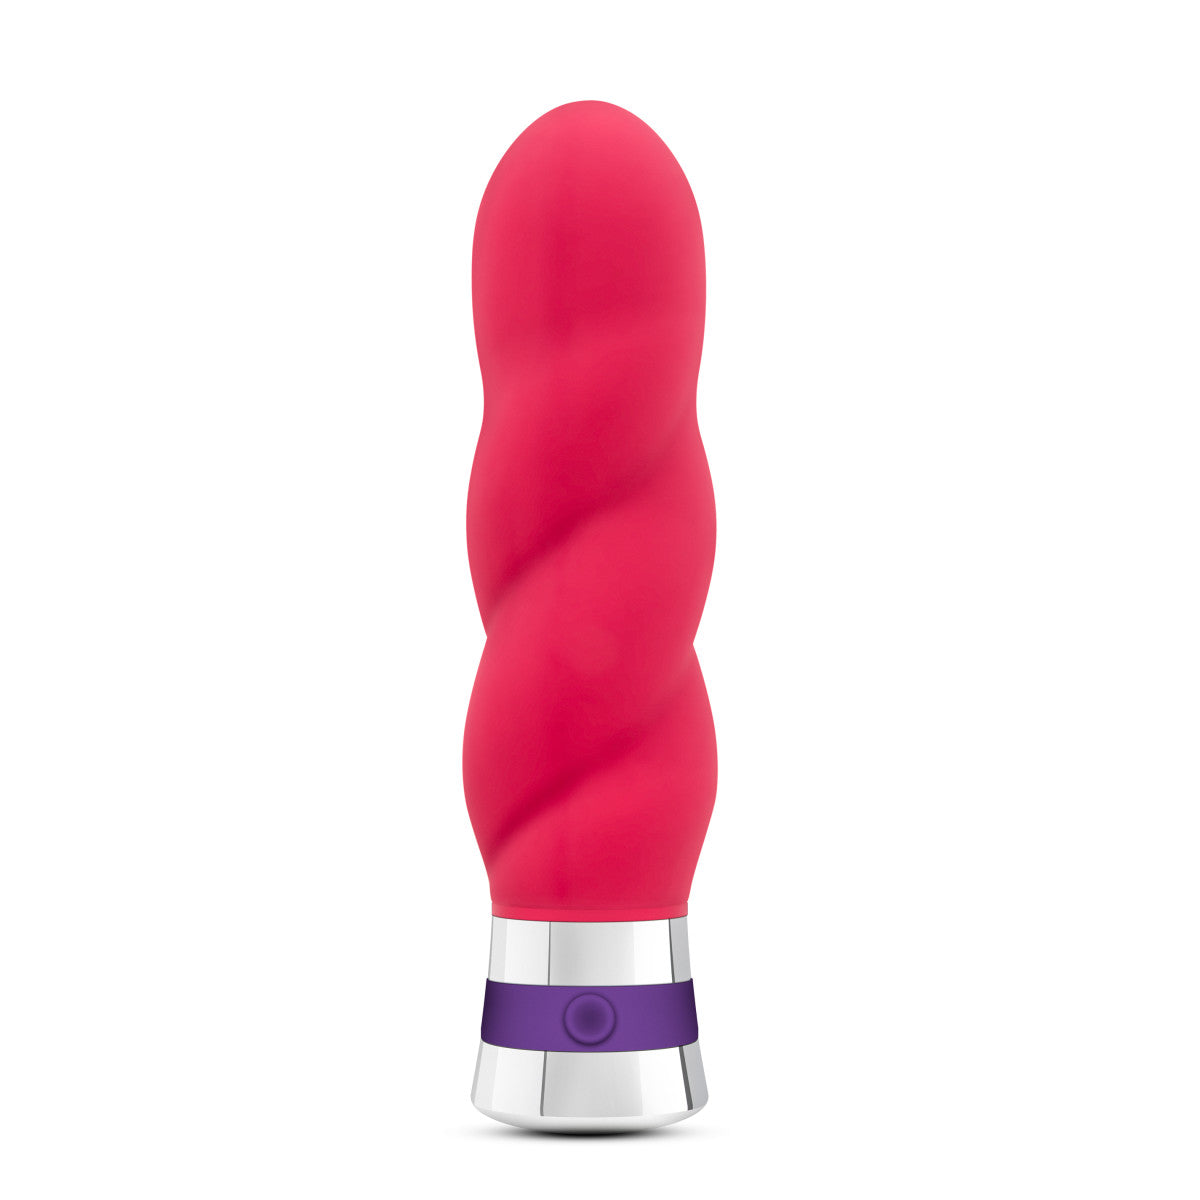 petite vibrator. Straight shape with curvy spiral texture. One button operation.  Additional images show alternate angles.